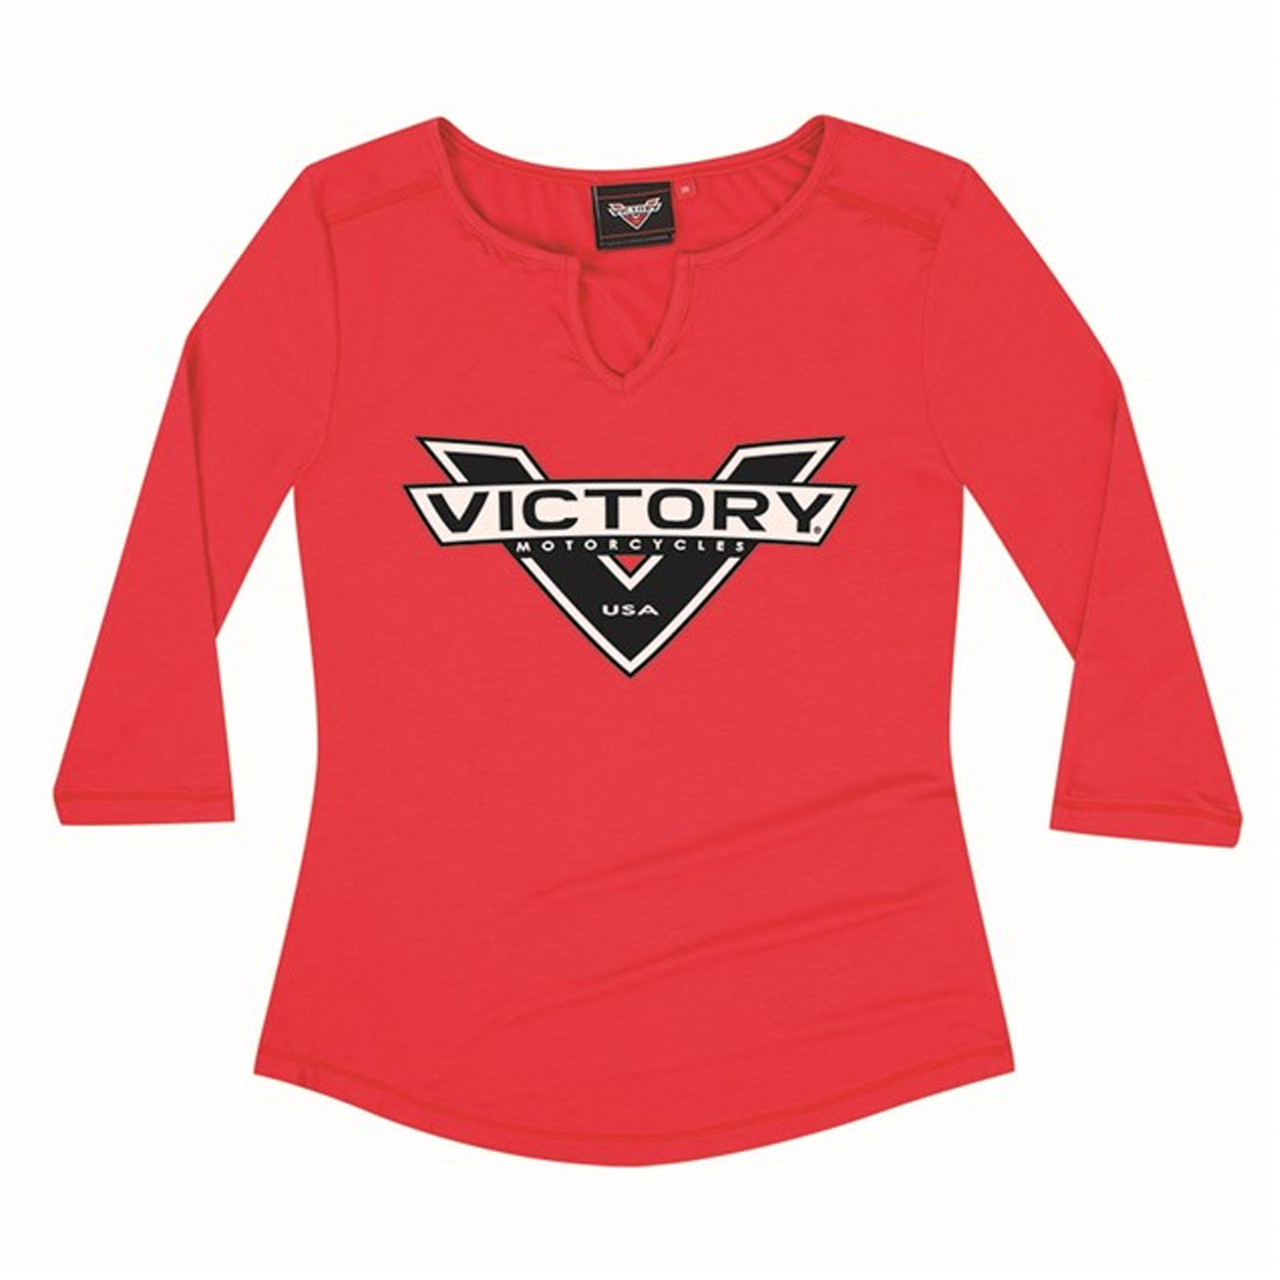 Victory Motorcycle New OEM Women's Red Badge 3 QTR Sleeve Shirt, XS, 286798501